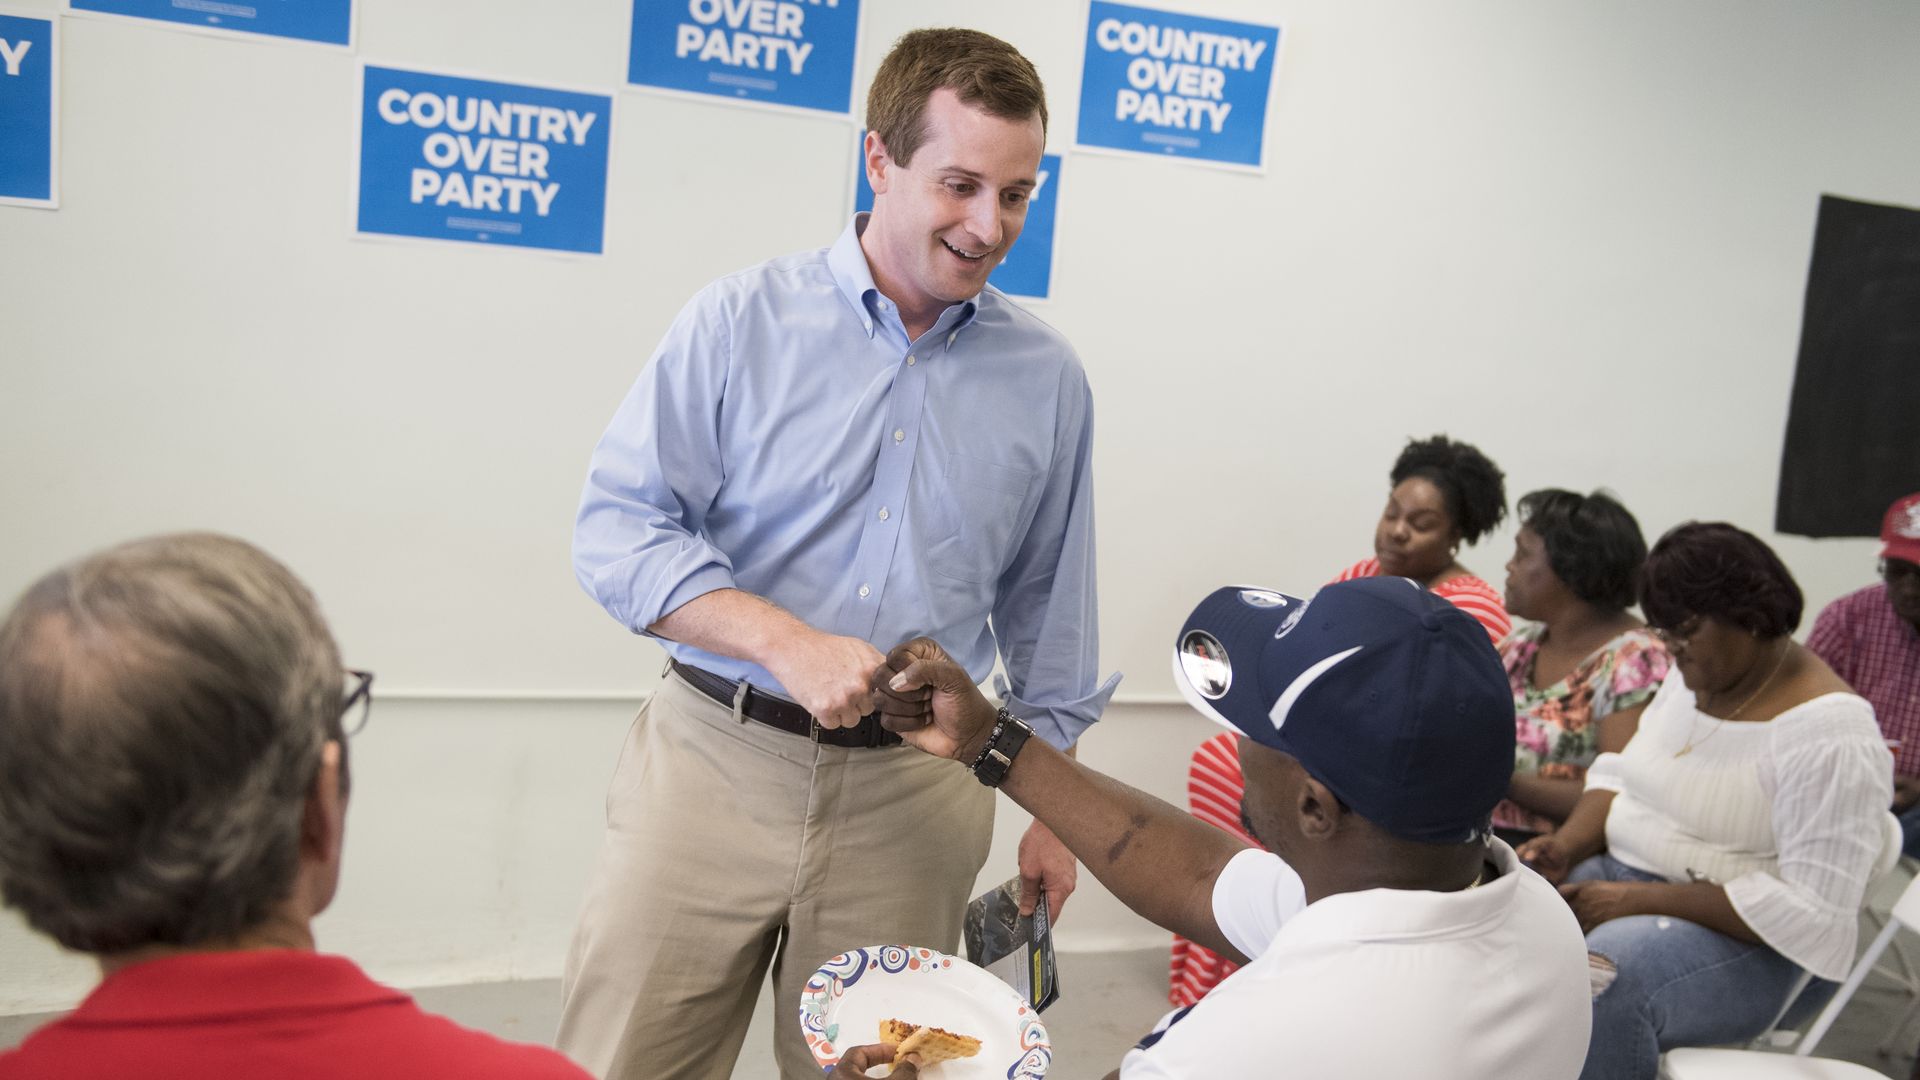 Congressional candidate Dan McCready shakes a voter's hand.